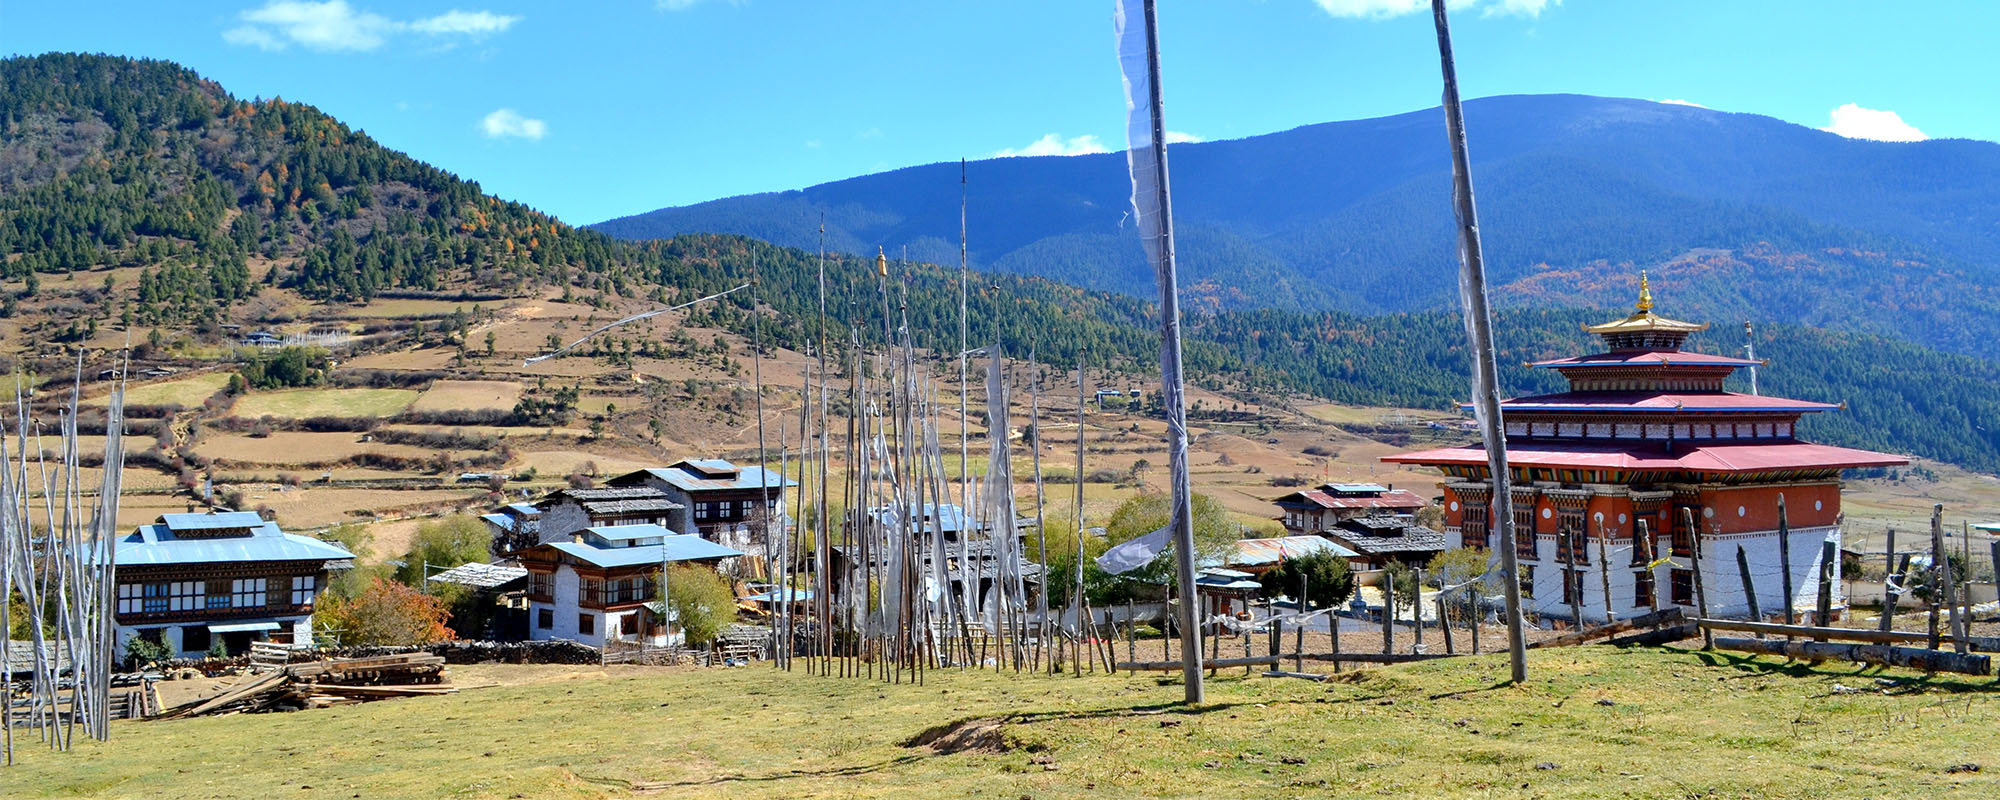 PLACES TO VISIT IN BUMTHANG